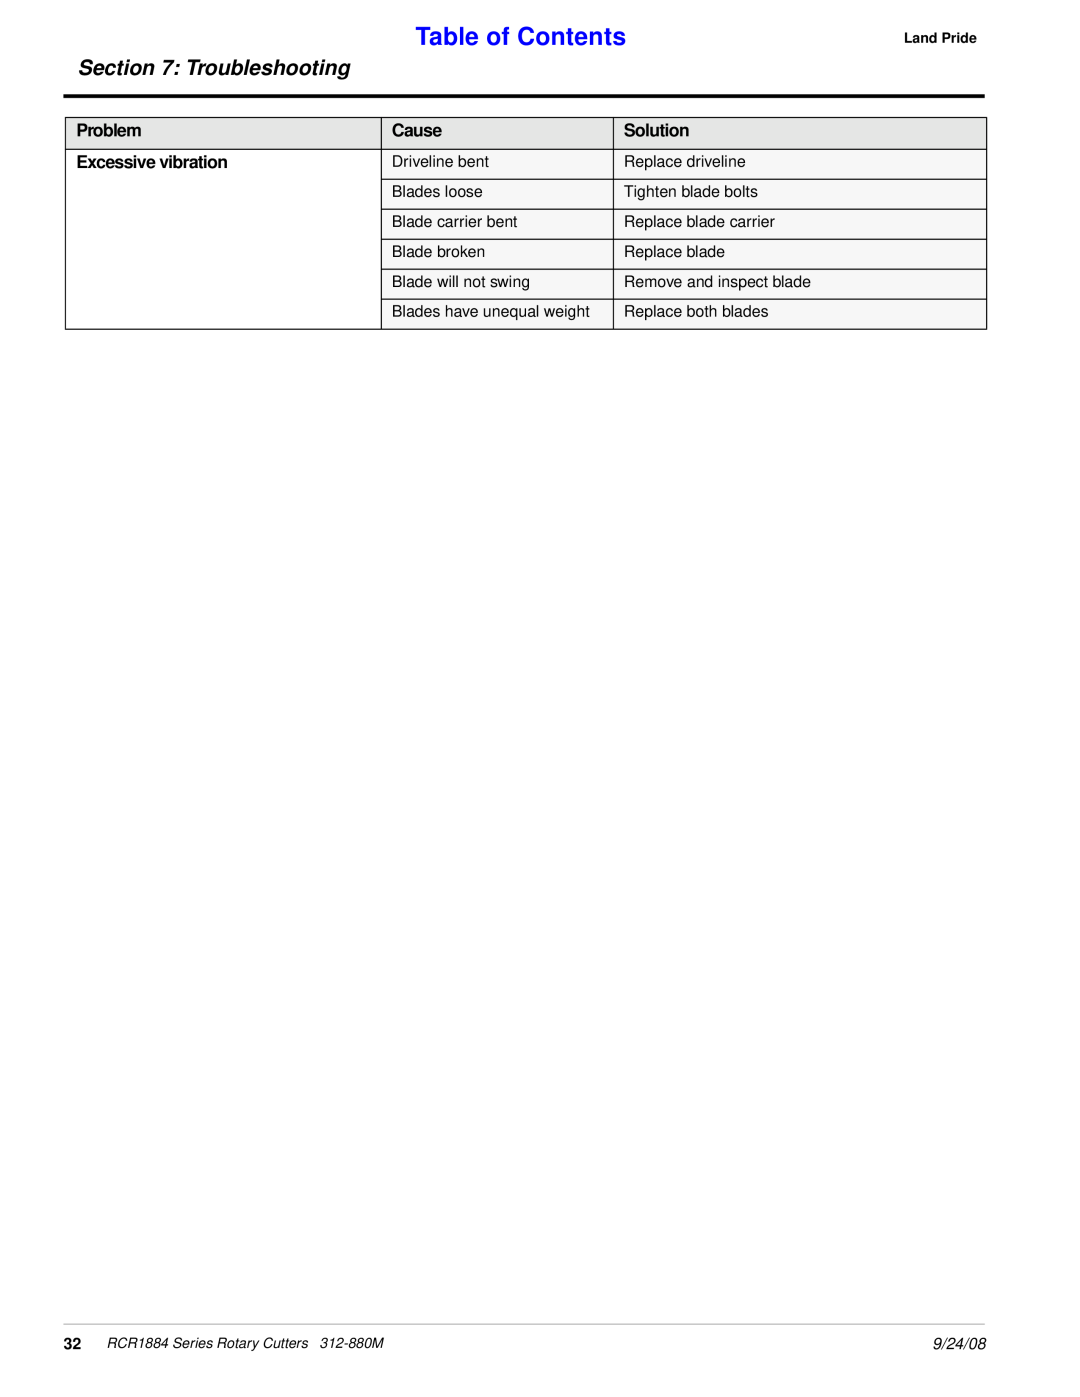 Land Pride RCR1884 manual Table of Contents, Troubleshooting, Problem, Cause, Solution, Excessive vibration, 9/24/08 